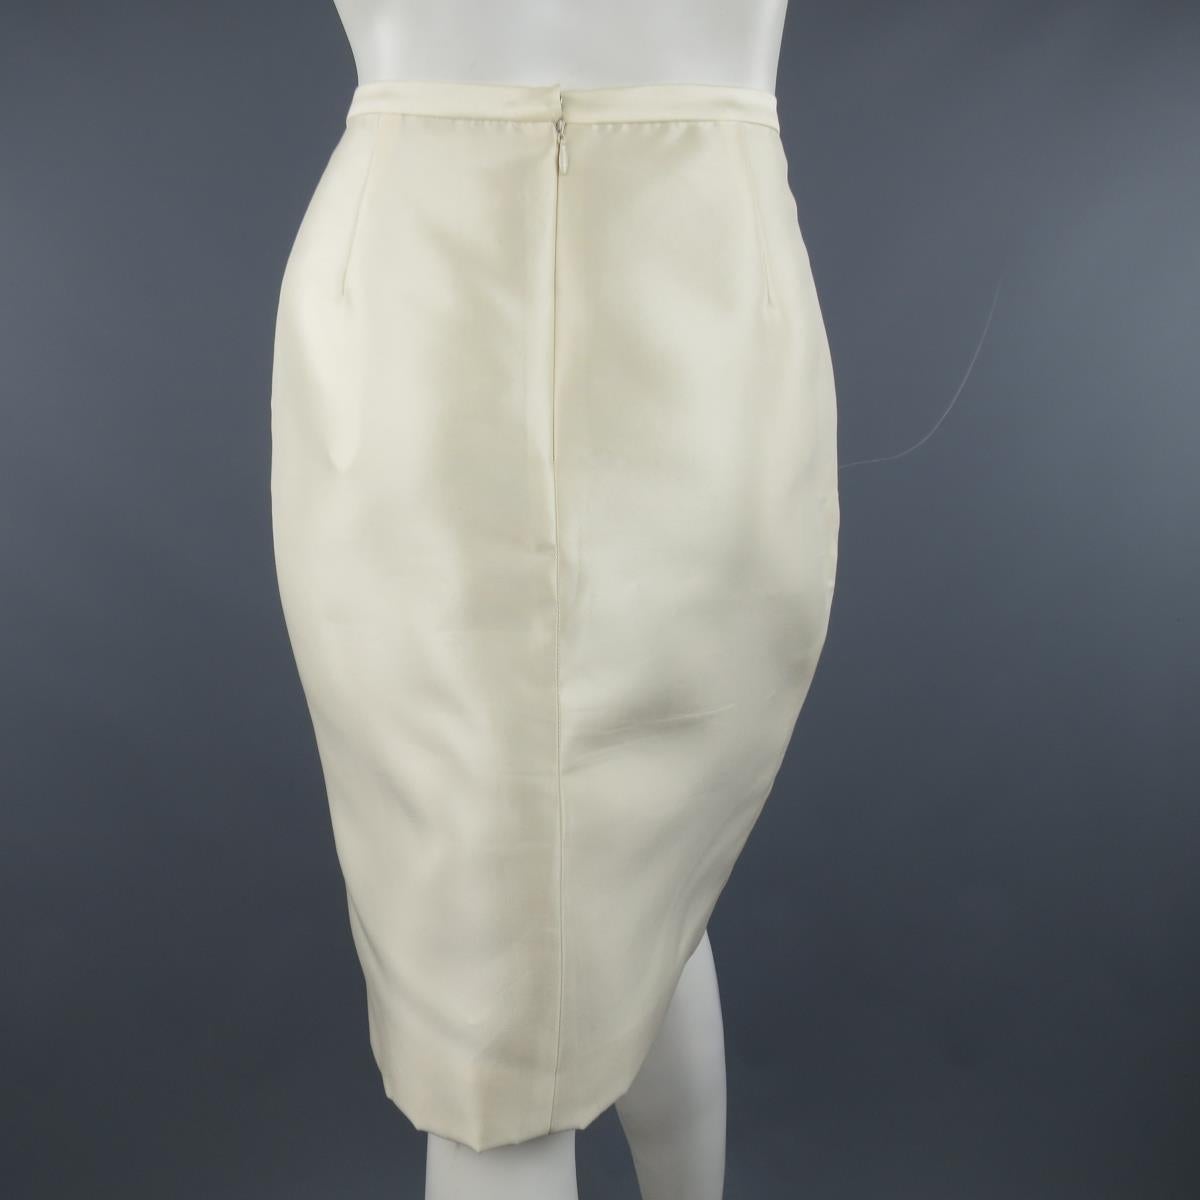 BADGLEY MISCHKA Size 6 Cream Structured Satin Pencil Skirt In Excellent Condition For Sale In San Francisco, CA